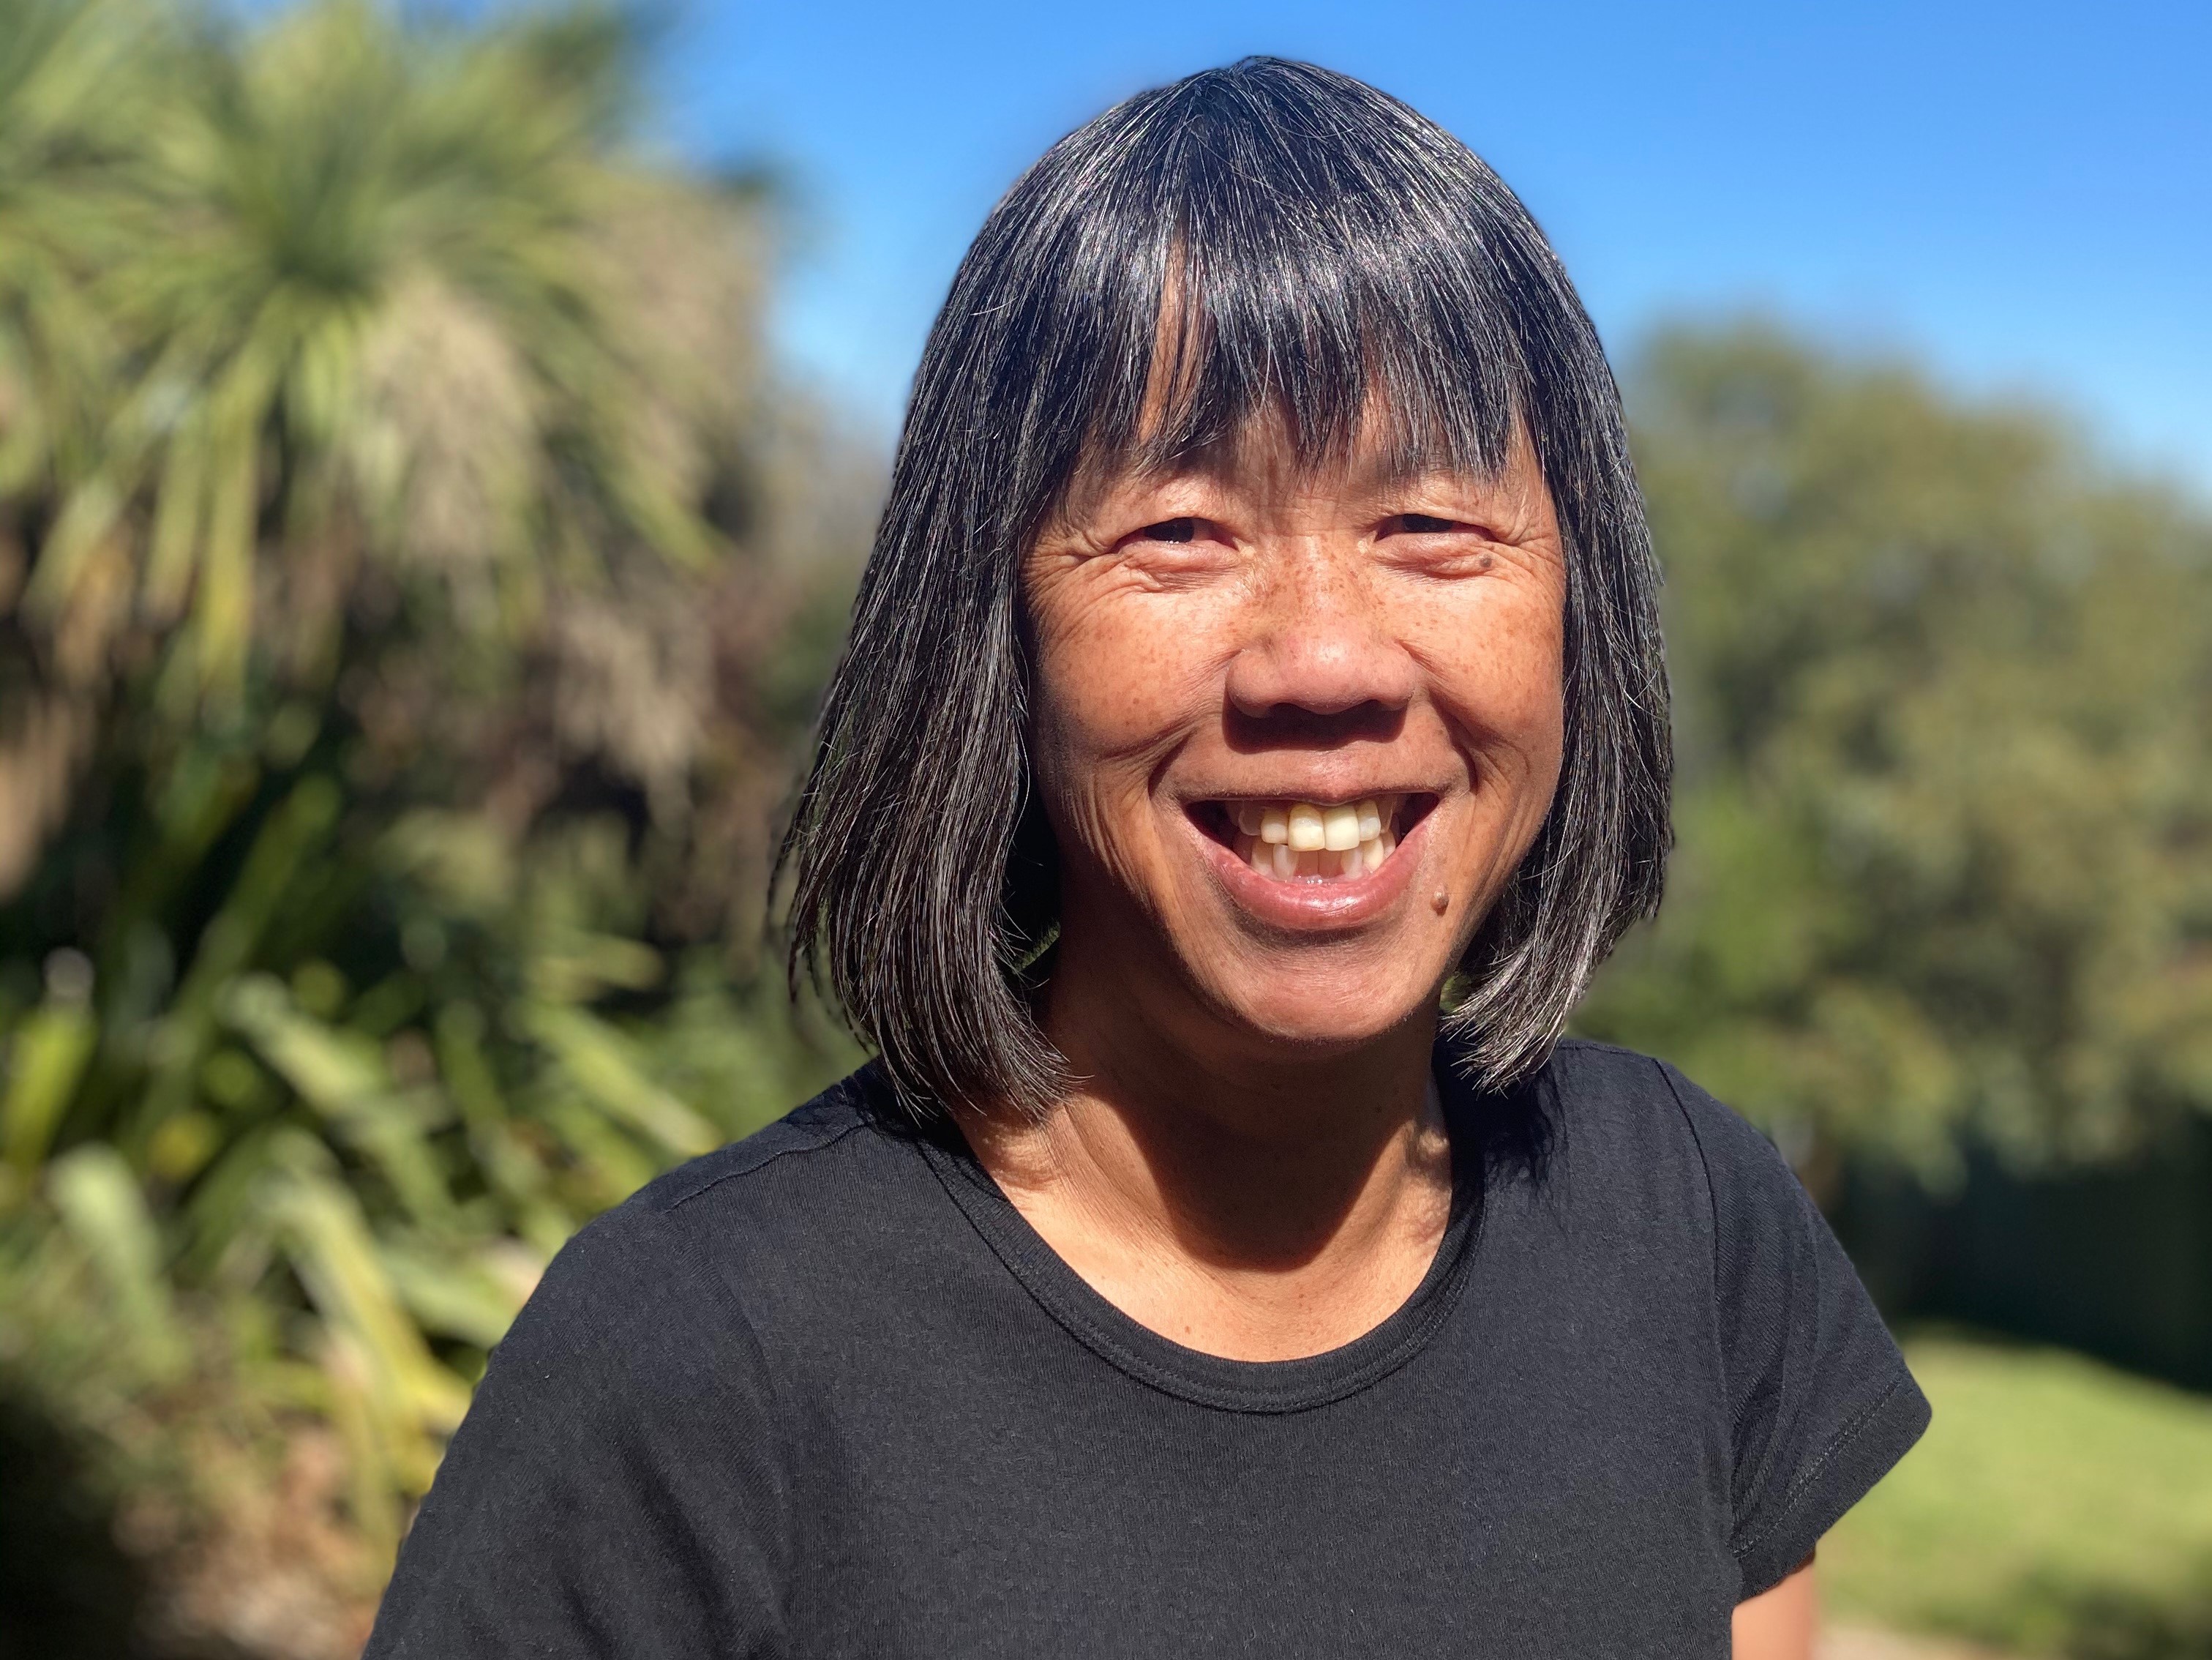 Associate Professor Anna Wong Shee is Chair of the Western Alliance Research Translation Committee